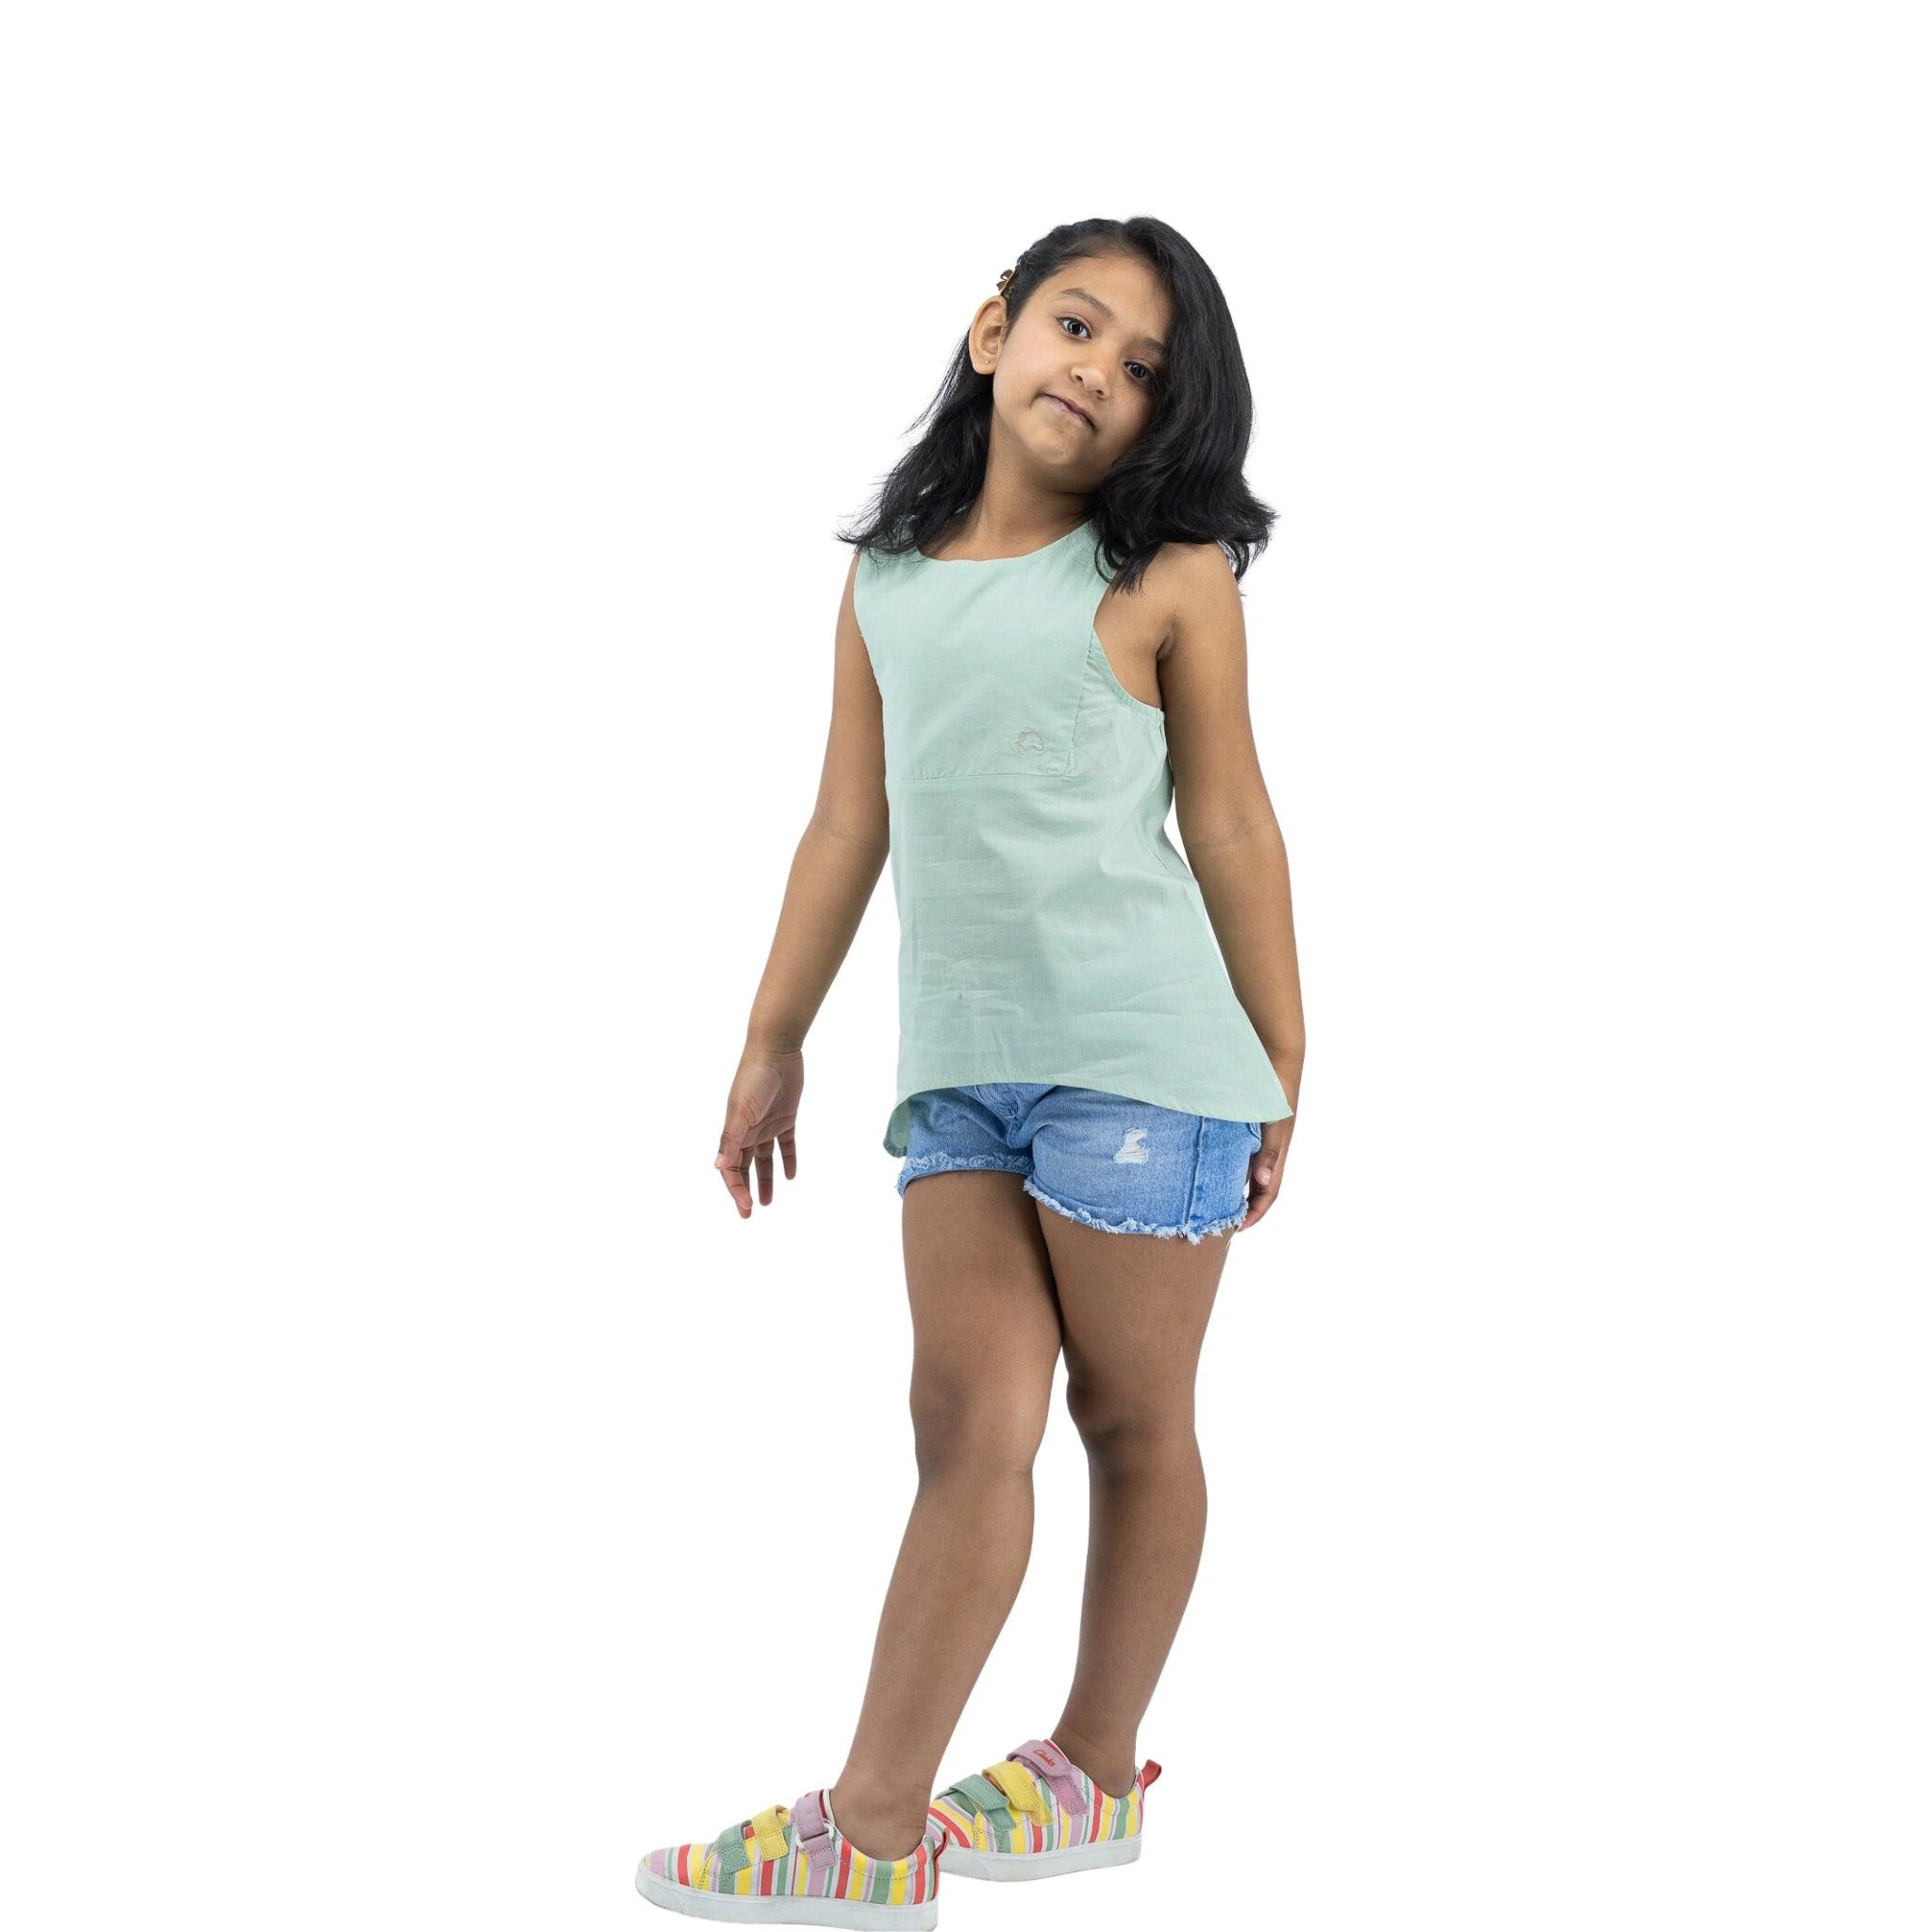 A young girl in a Karee Smoke Green Cotton Bib Neck Top for kids and denim shorts stands confidently against a white background.